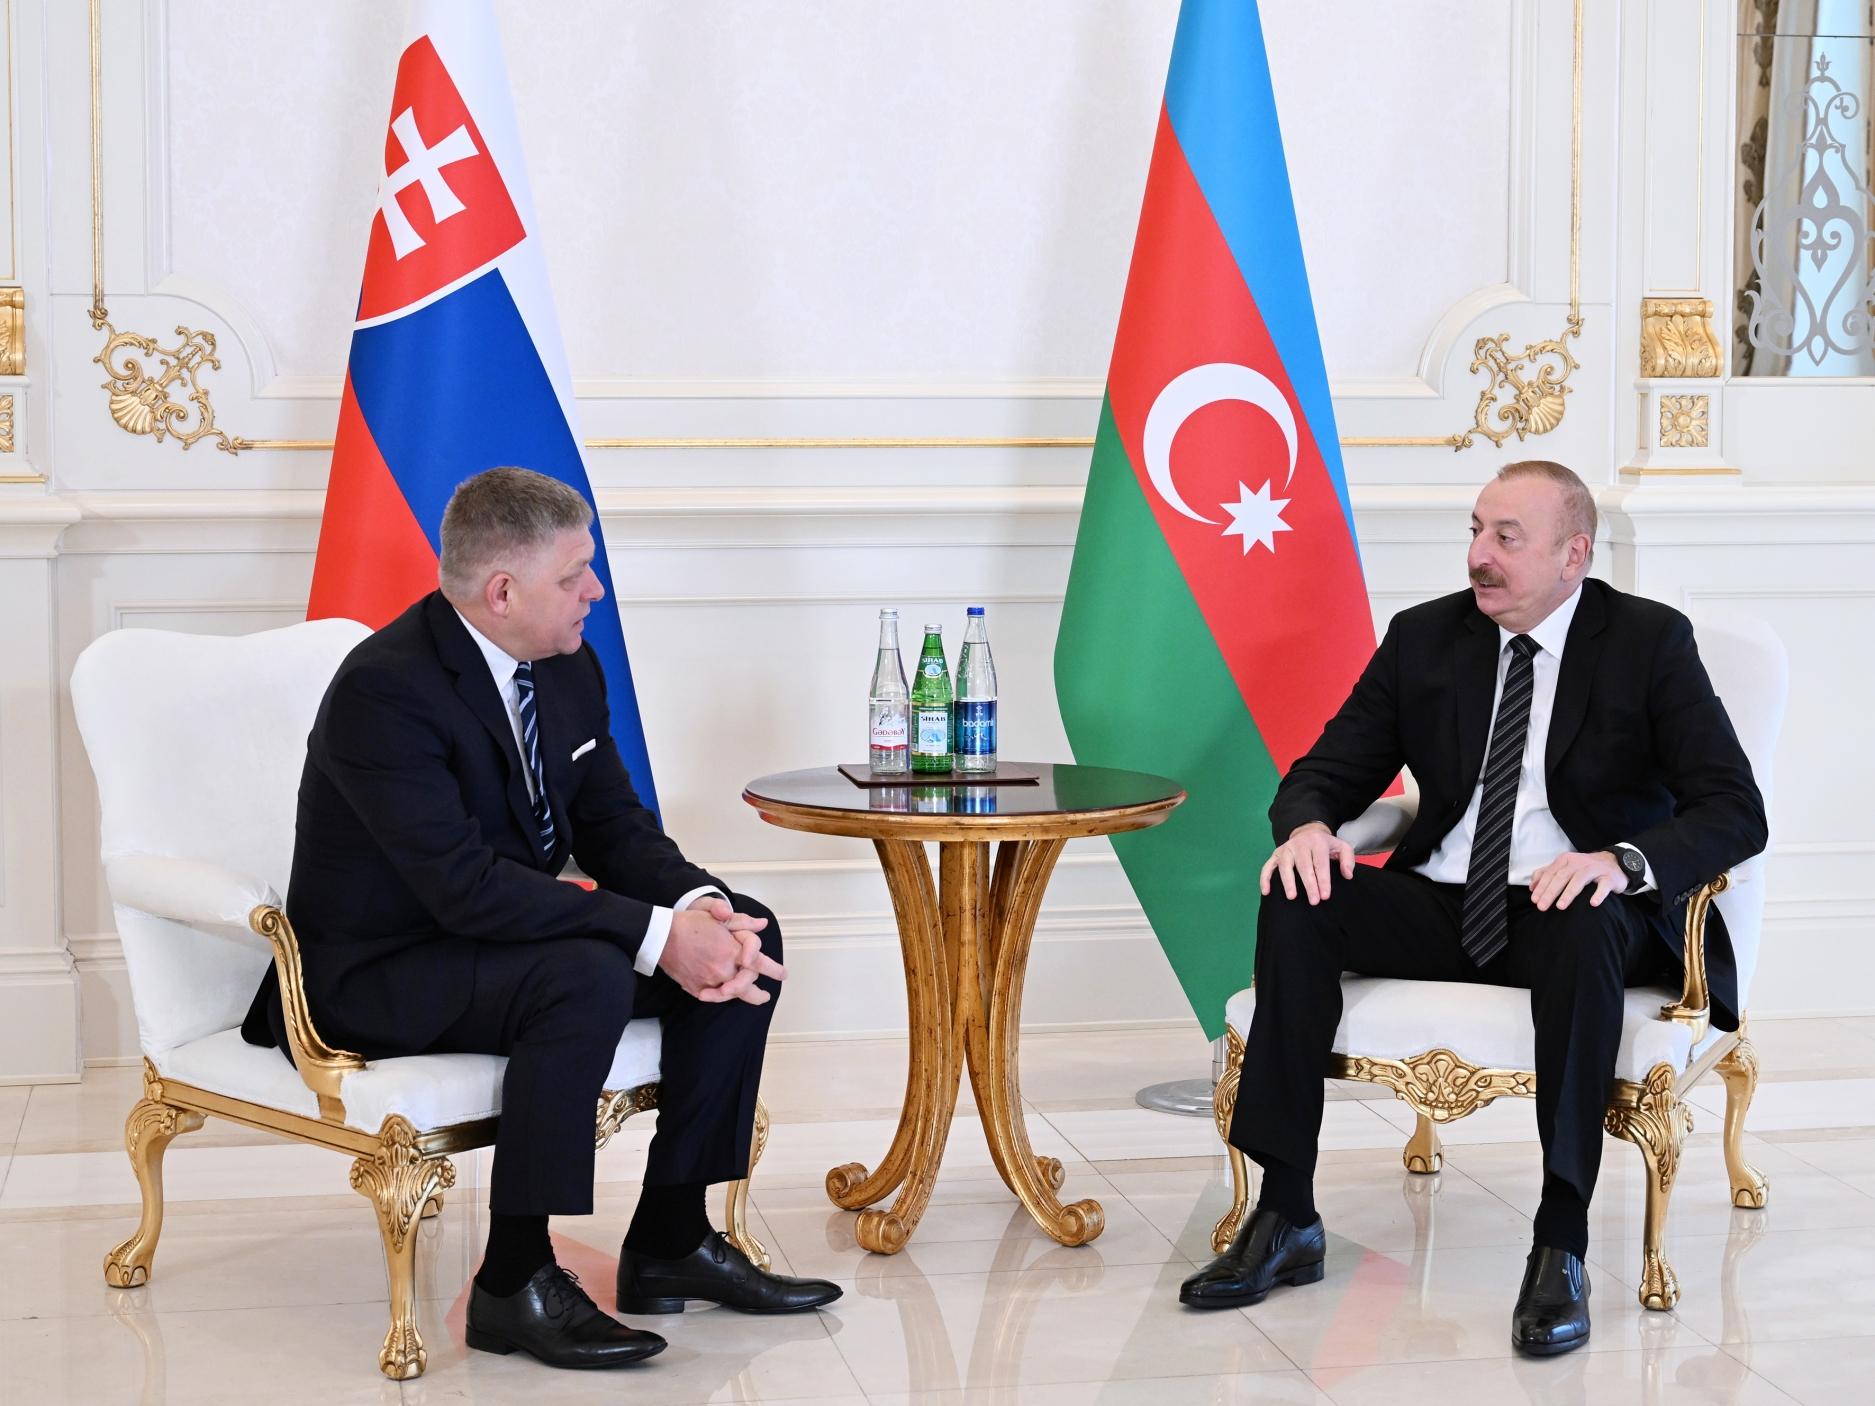 President Ilham Aliyev Commences One-on-One Meeting with Prime Minister of Slovakia